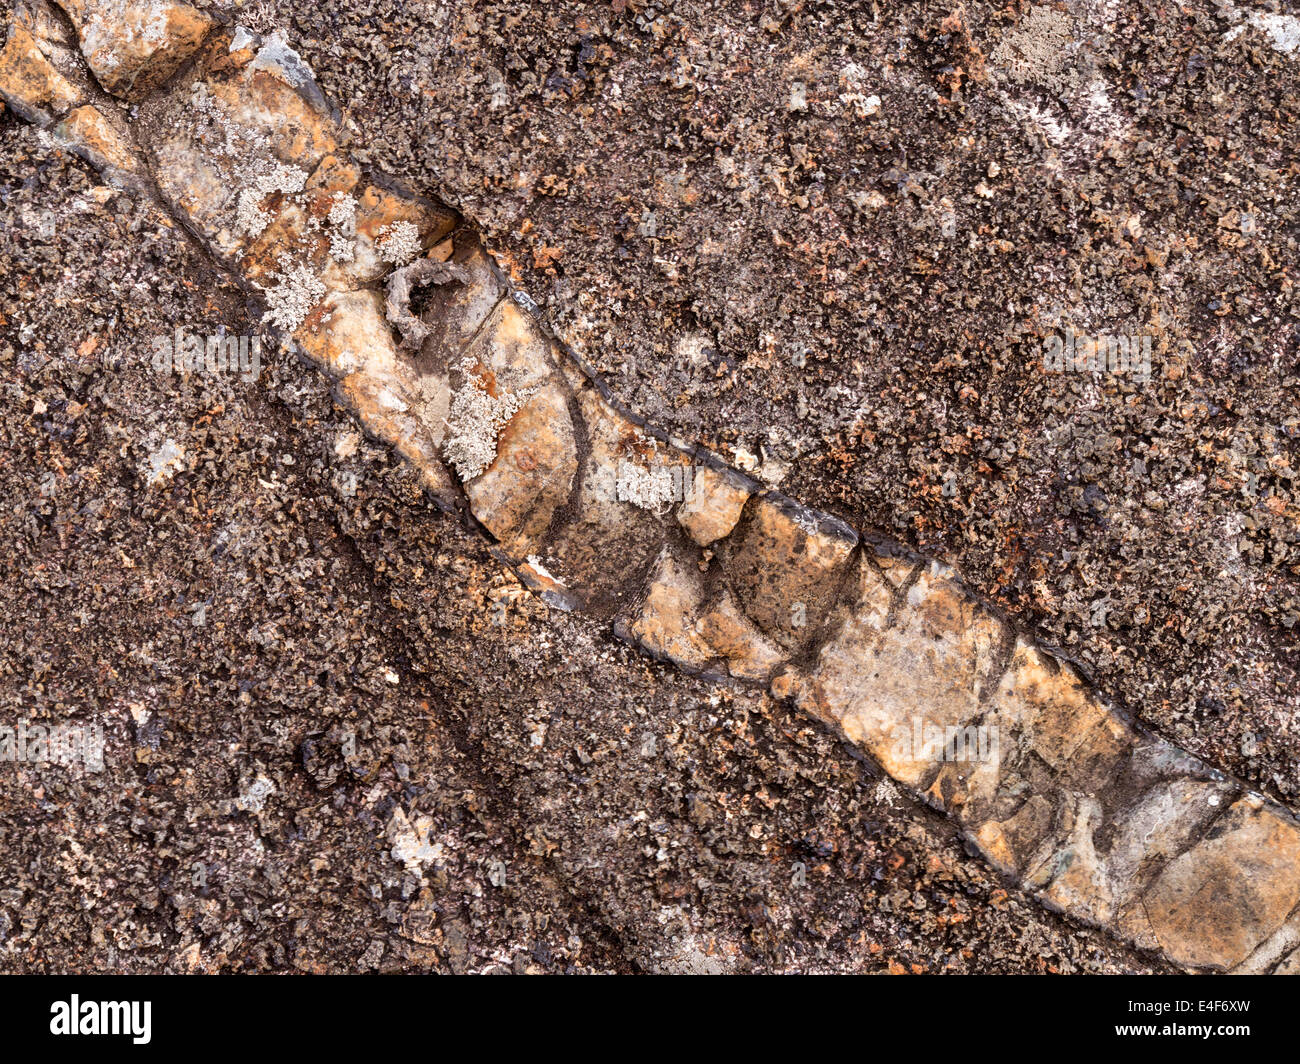 Seam of quartz or calcite intrusion in glacial smoothed and scored gabbro rock, Isle of Skye, Scotland, UK Stock Photo